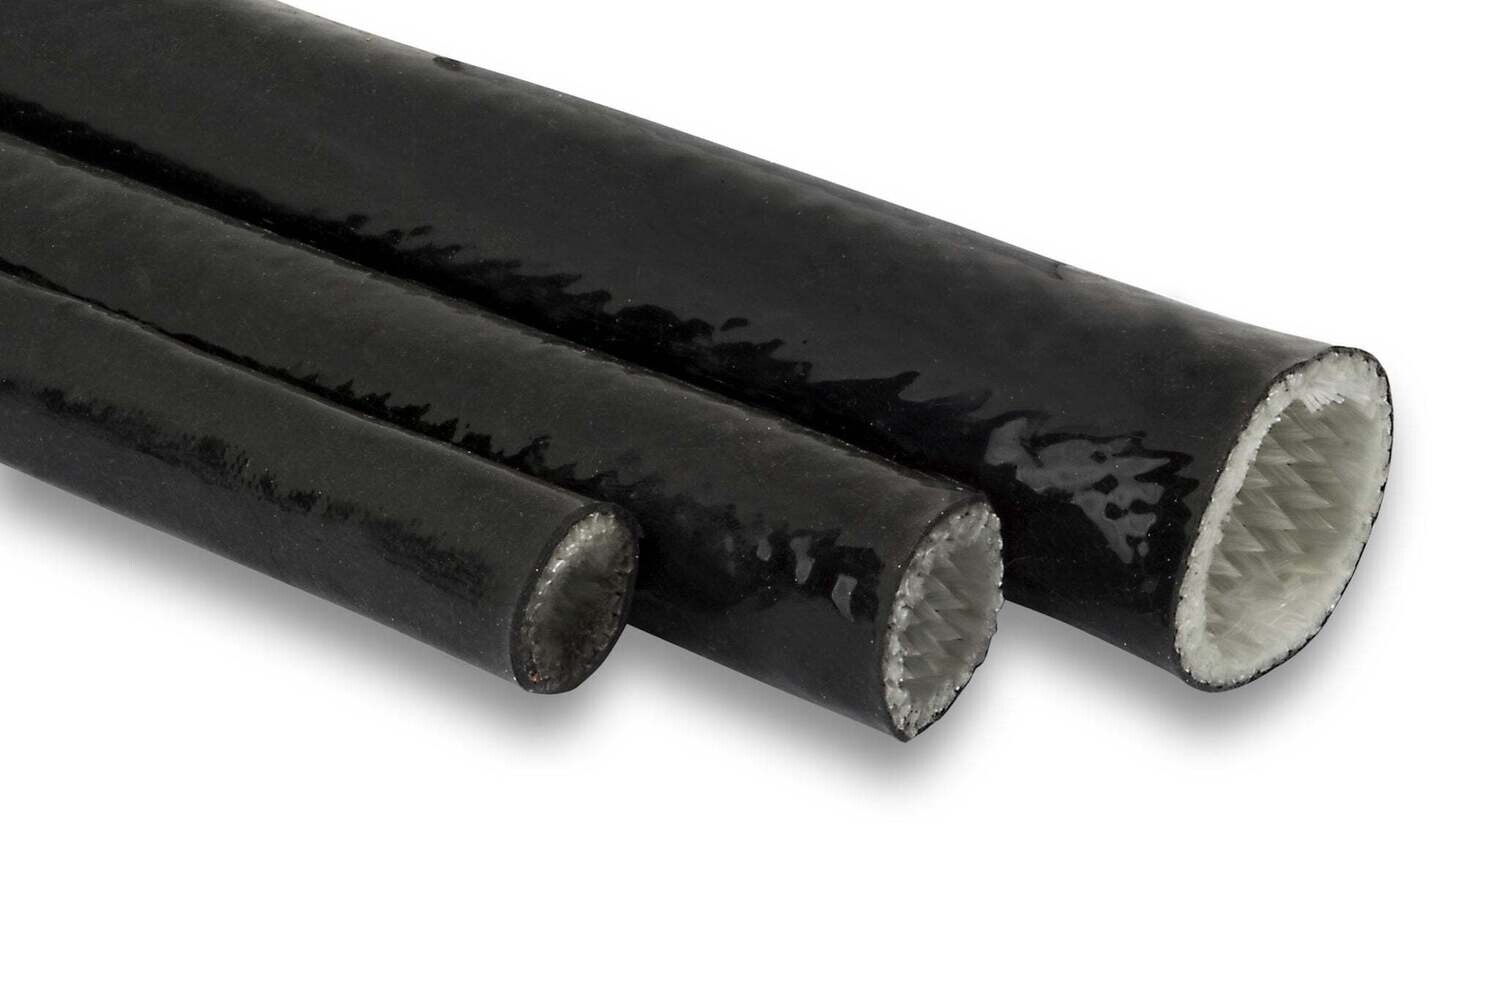 Black Silicon High Heat Sleeve - 15mm, 1.0m Multiple Qty will come on a continuous Roll